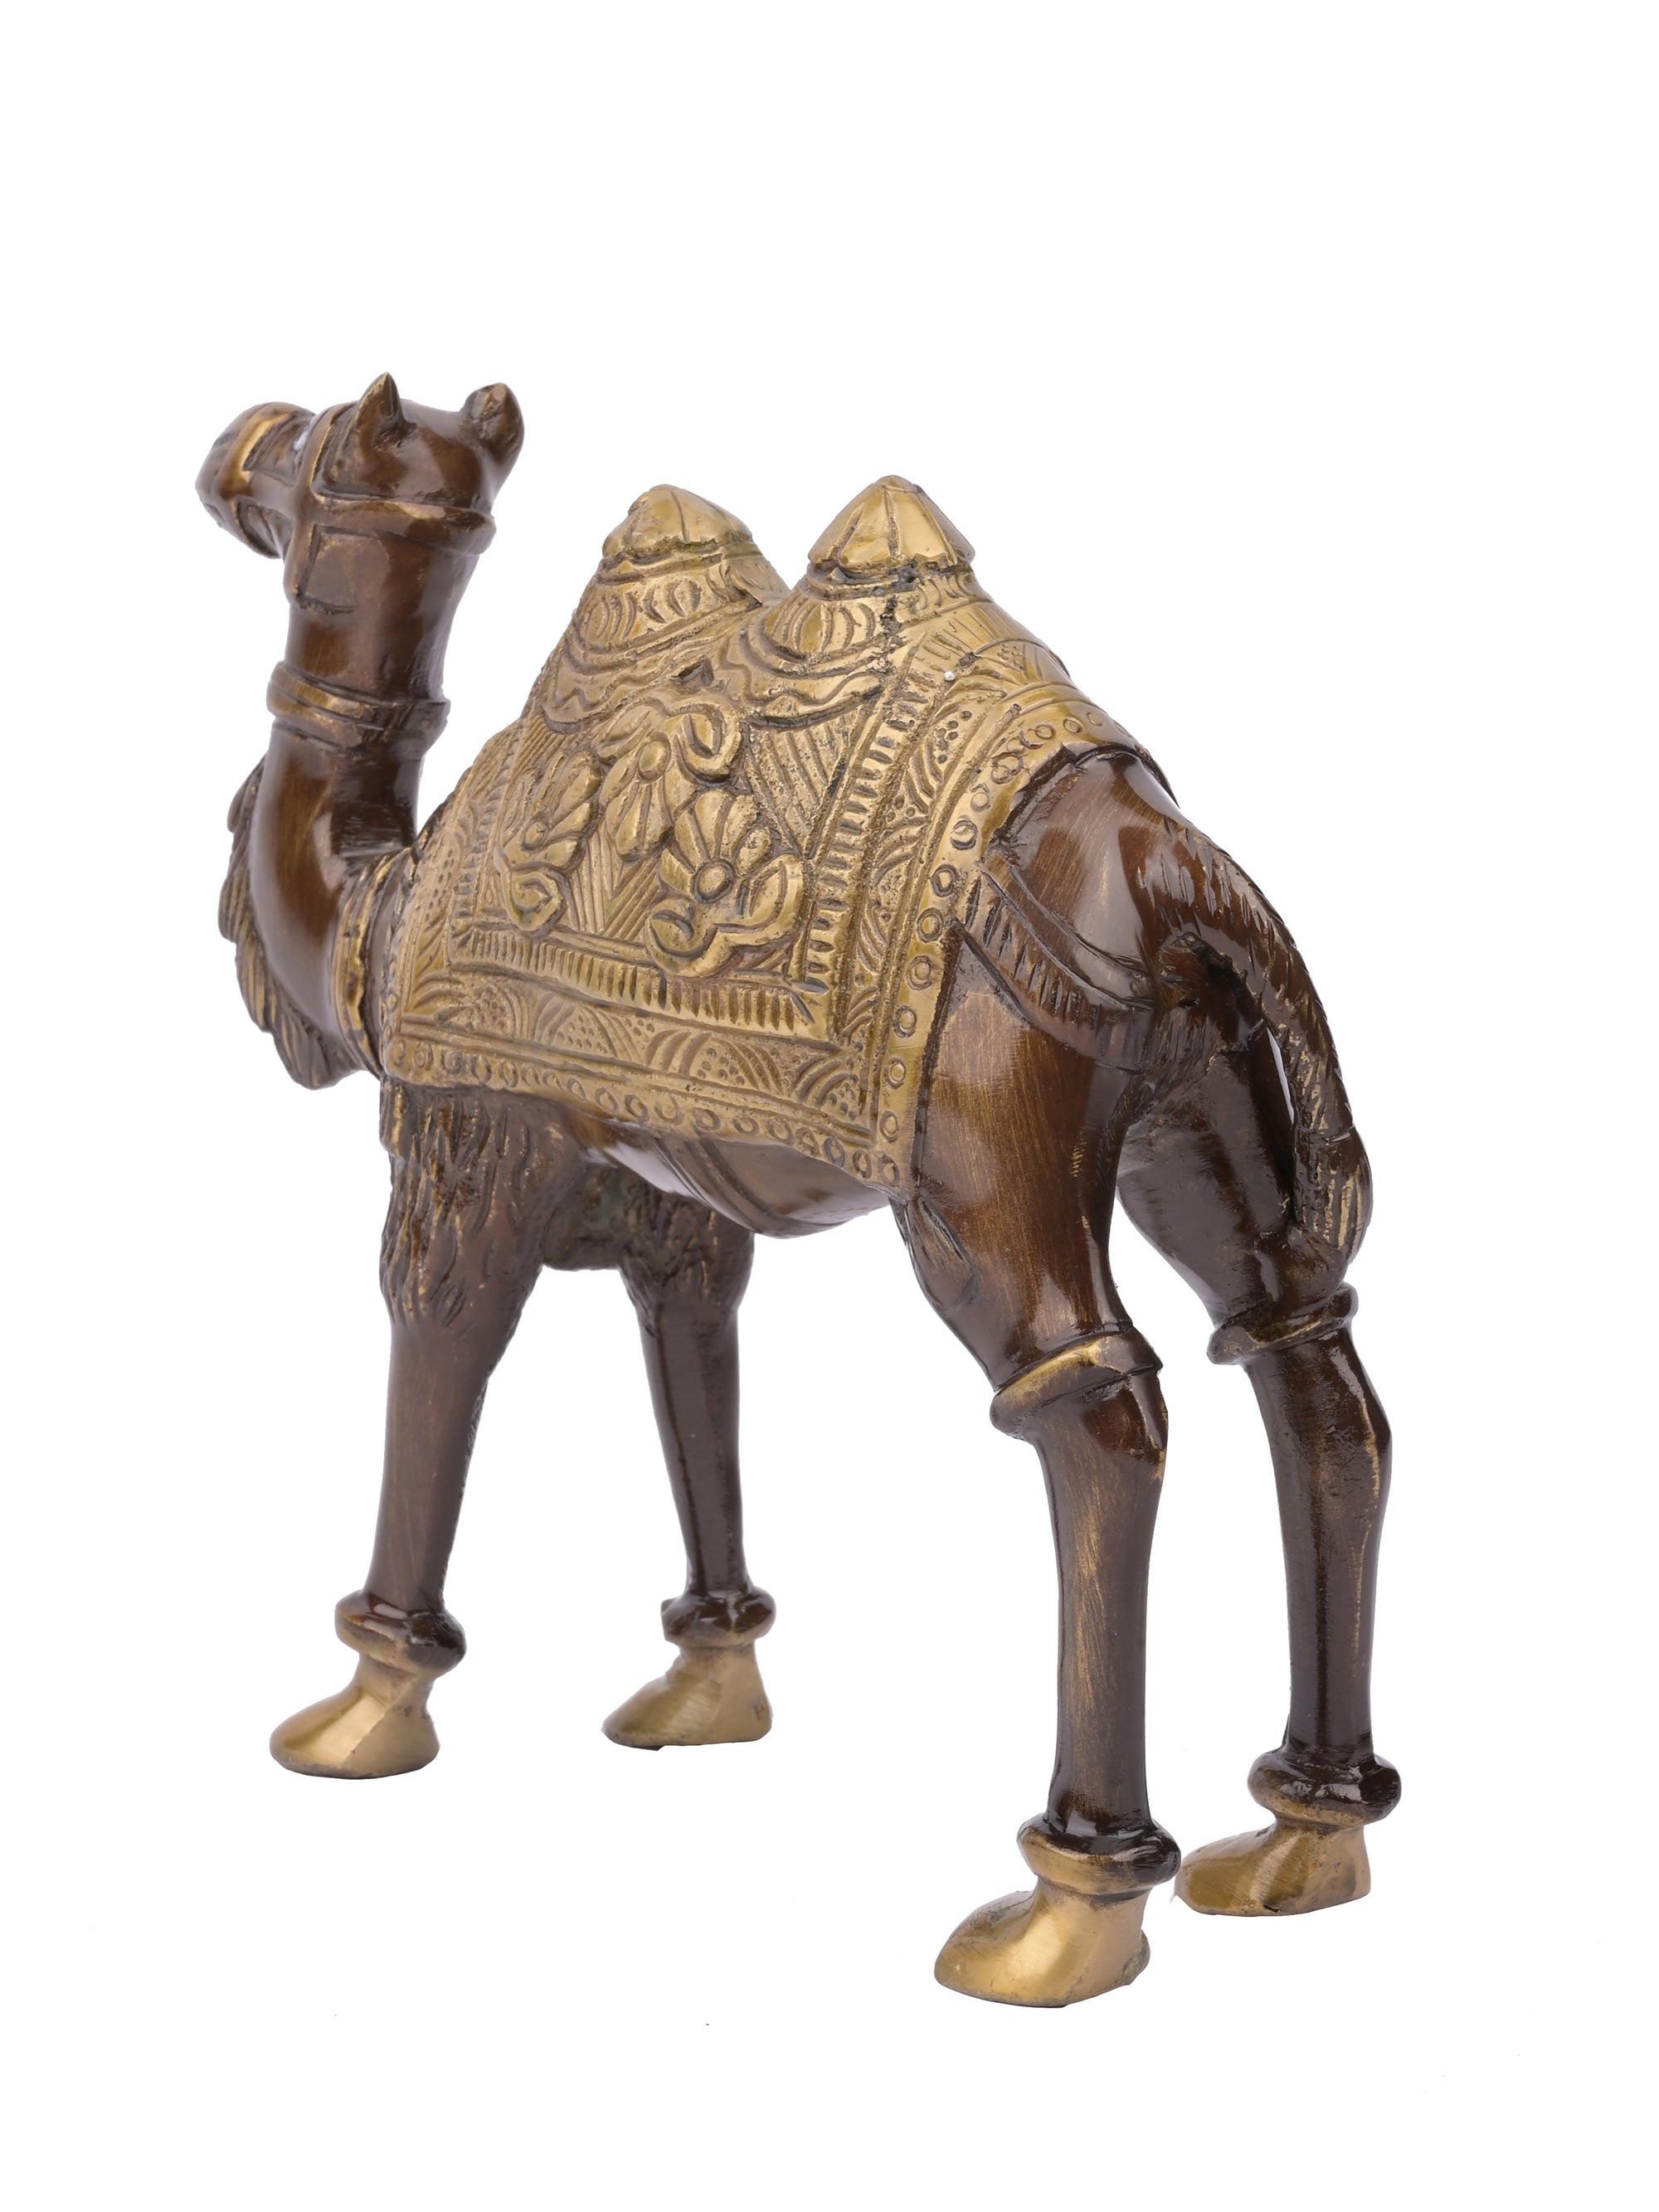 Brass crafted and painted Decorative Camel Showpiece - The Heritage Artifacts